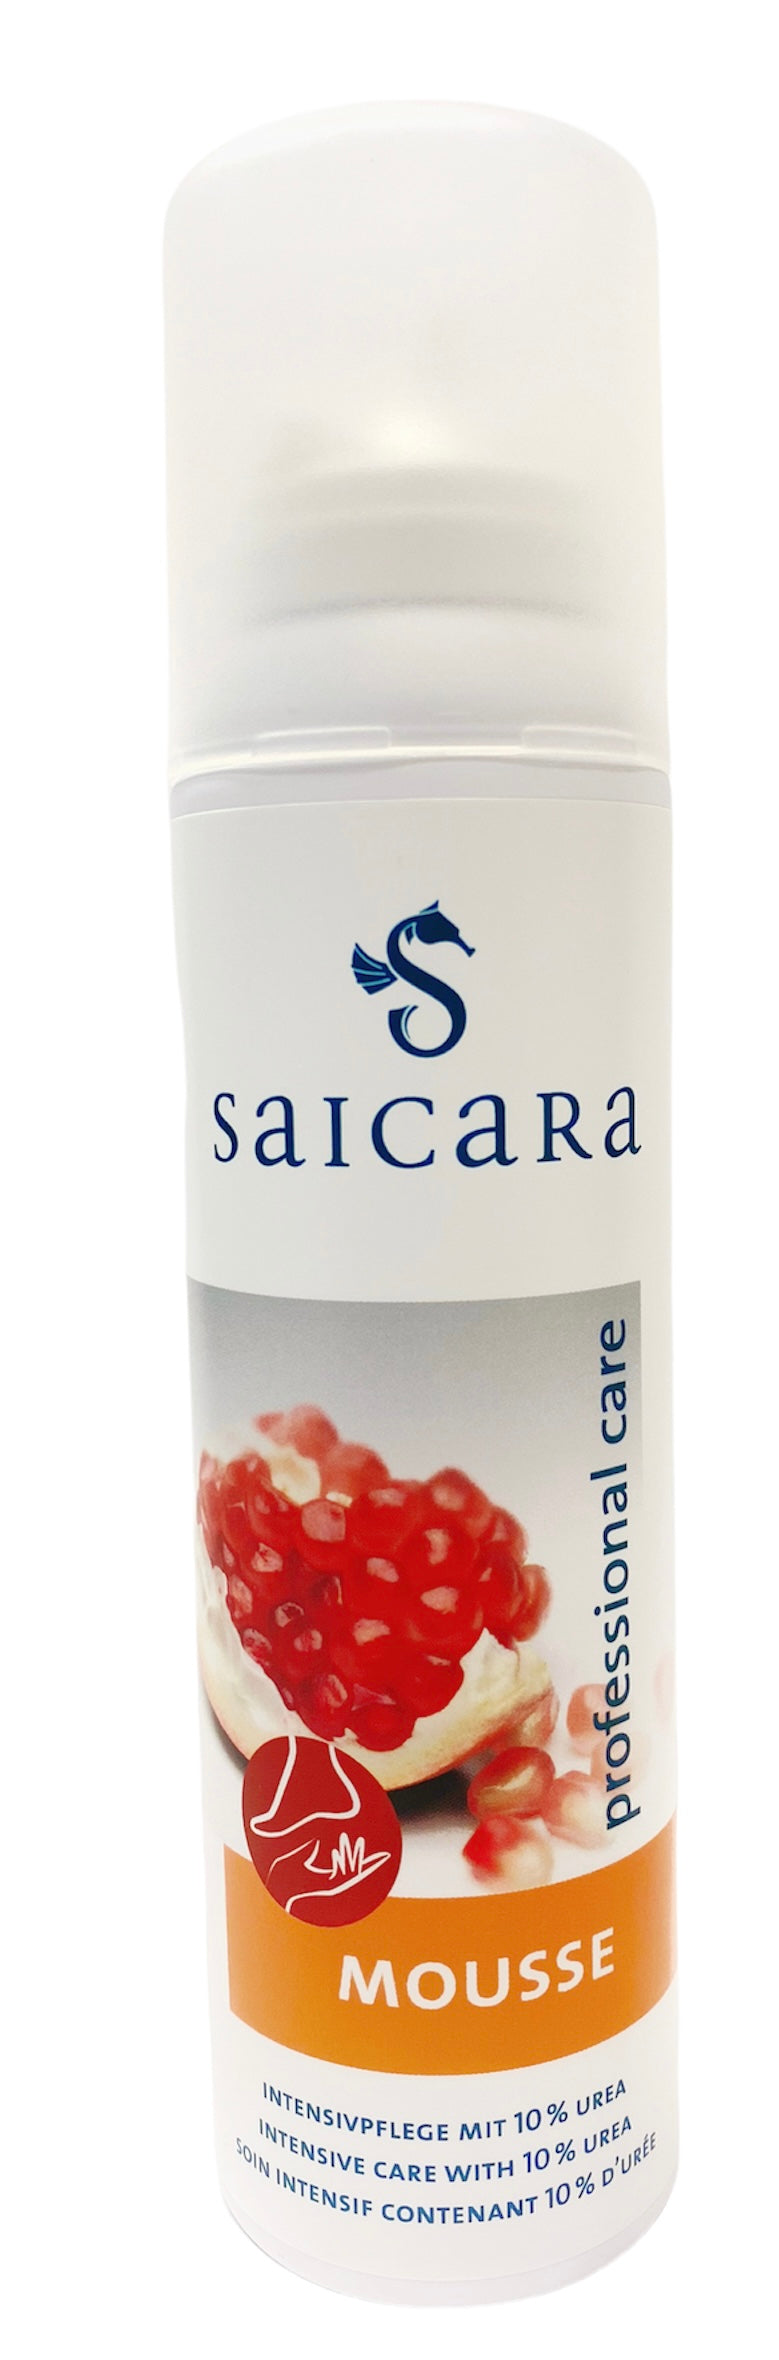 SAICARA MOUSSE foam cream for dry skin and for use on the whole body. For the care of eczema or mild psoriasis. 35ml/150ml